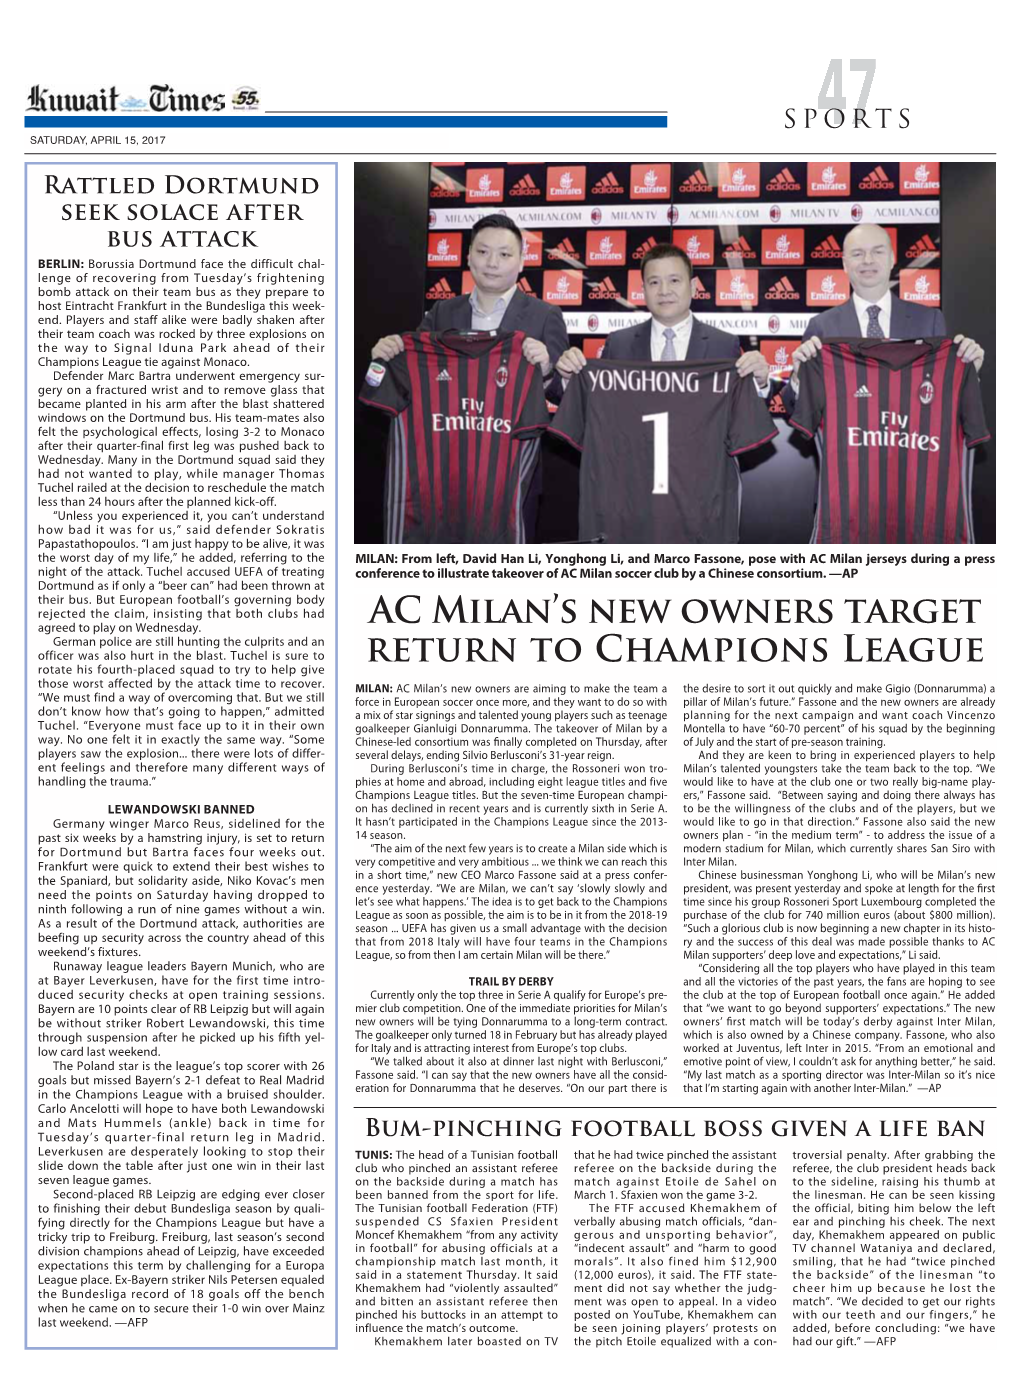 AC Milan's New Owners Target Return to Champions LEAGUE